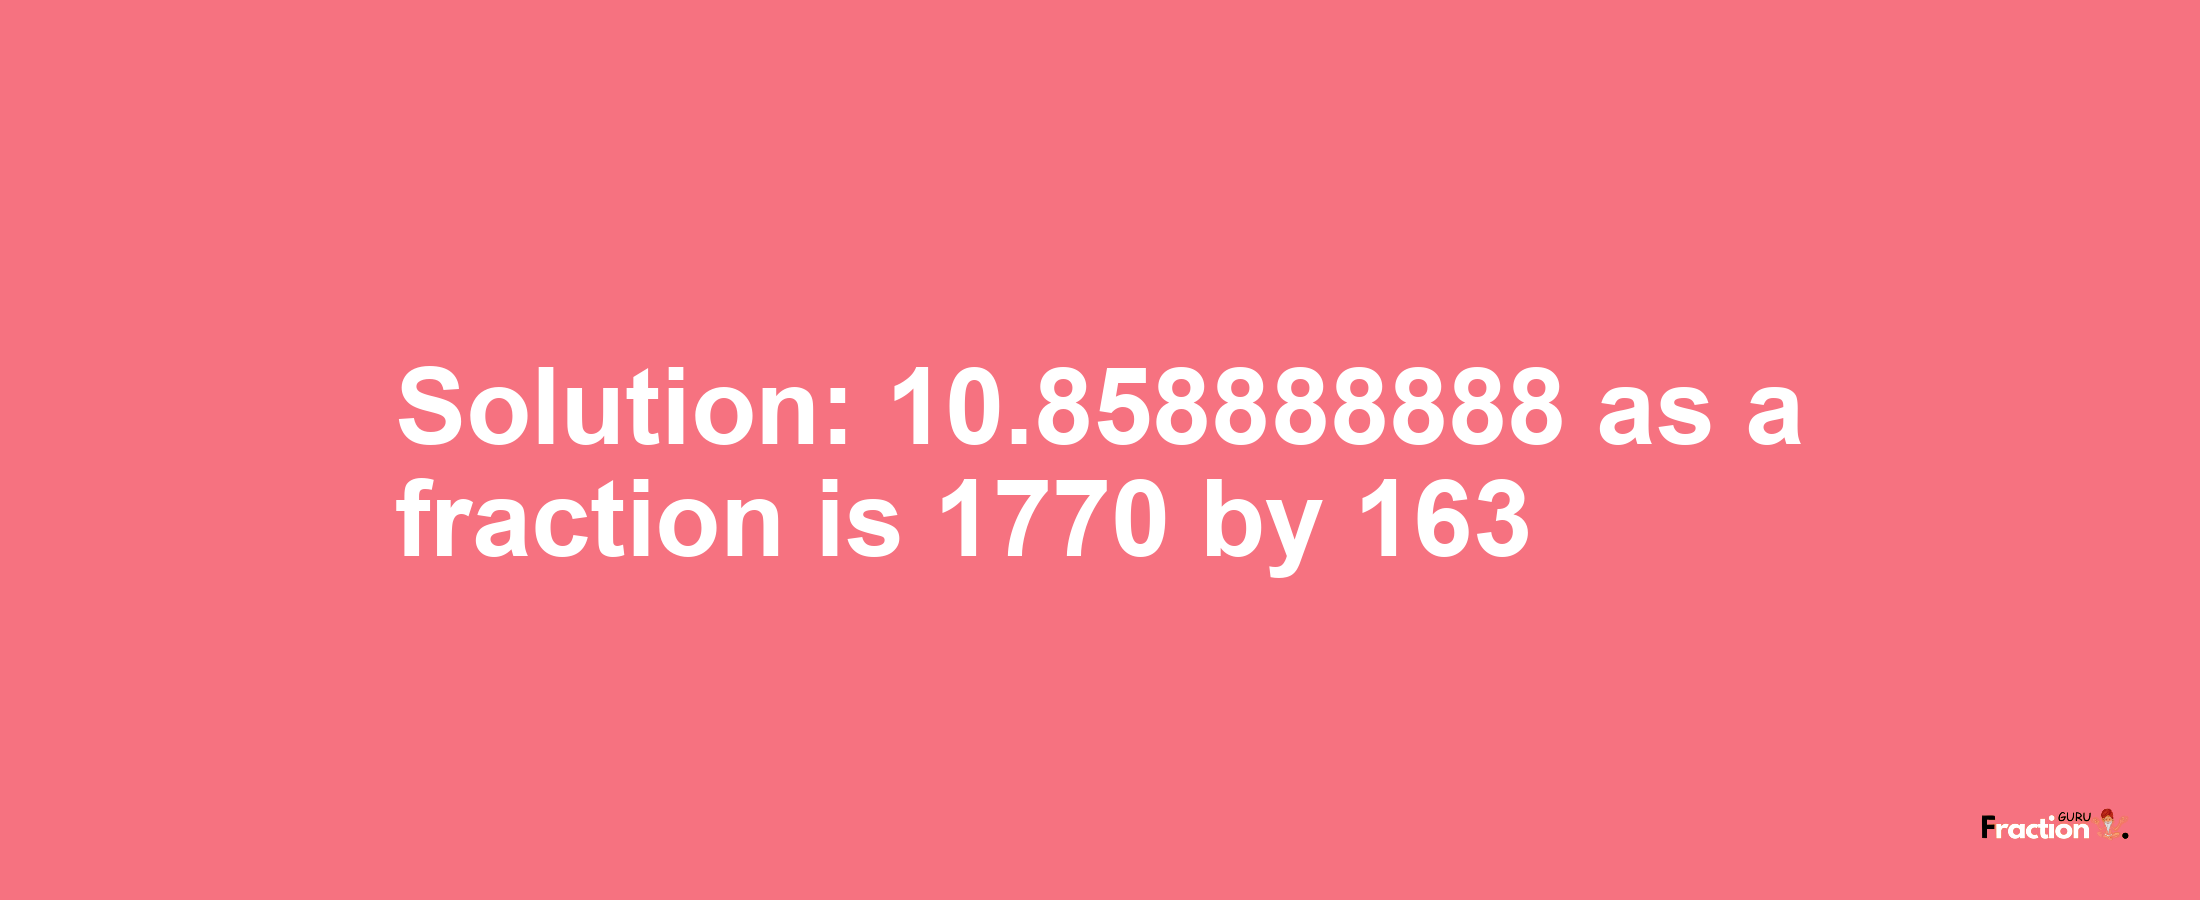 Solution:10.858888888 as a fraction is 1770/163